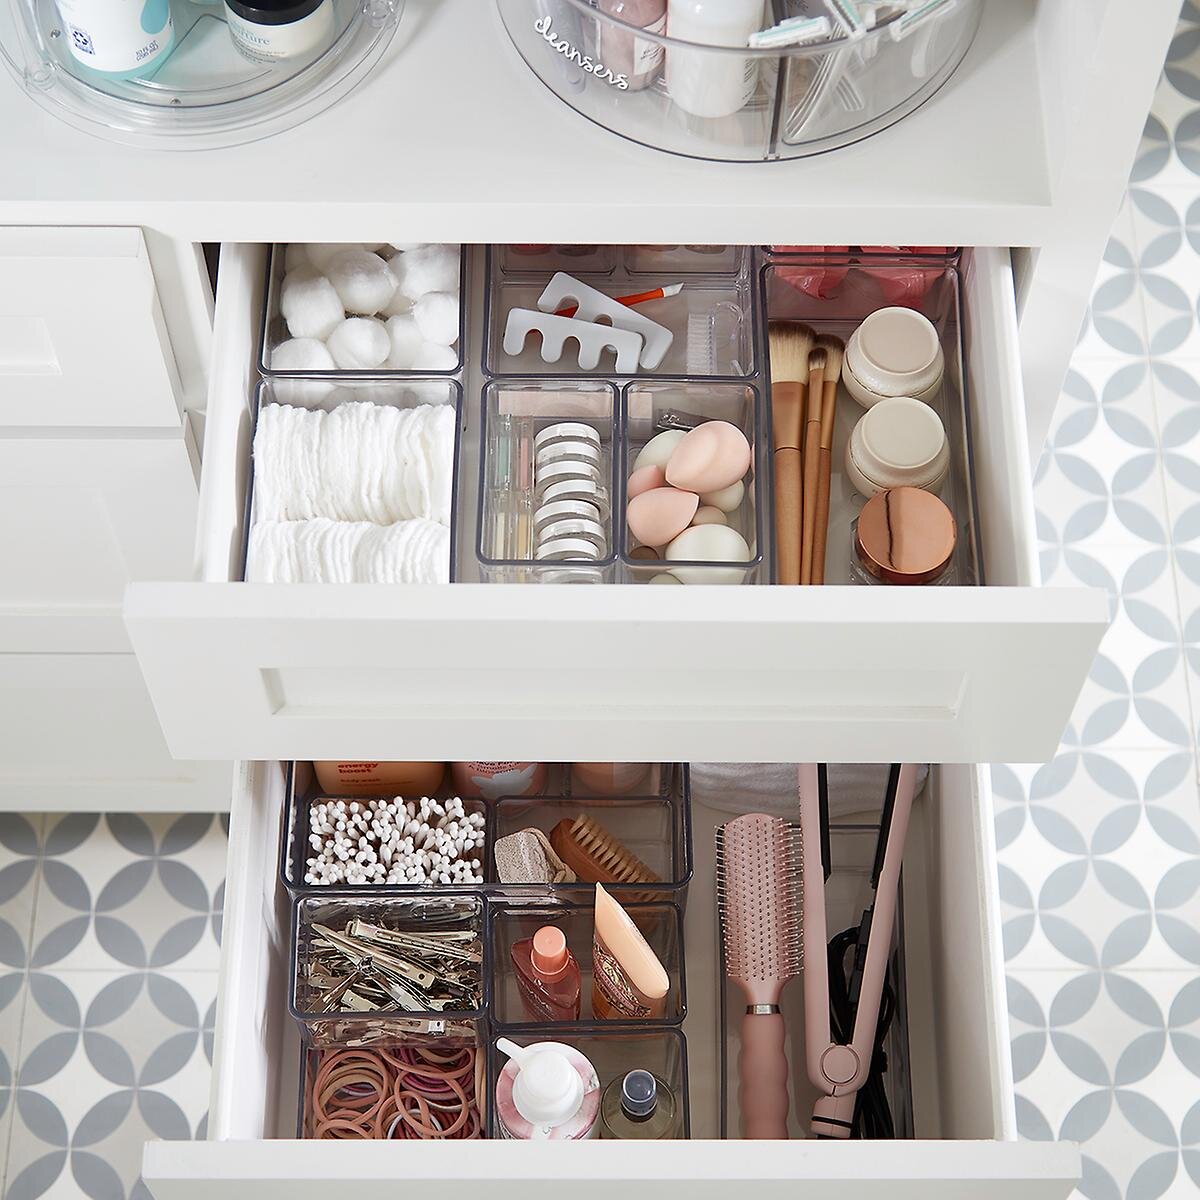 These smaller bins allow for more detailed organizing.